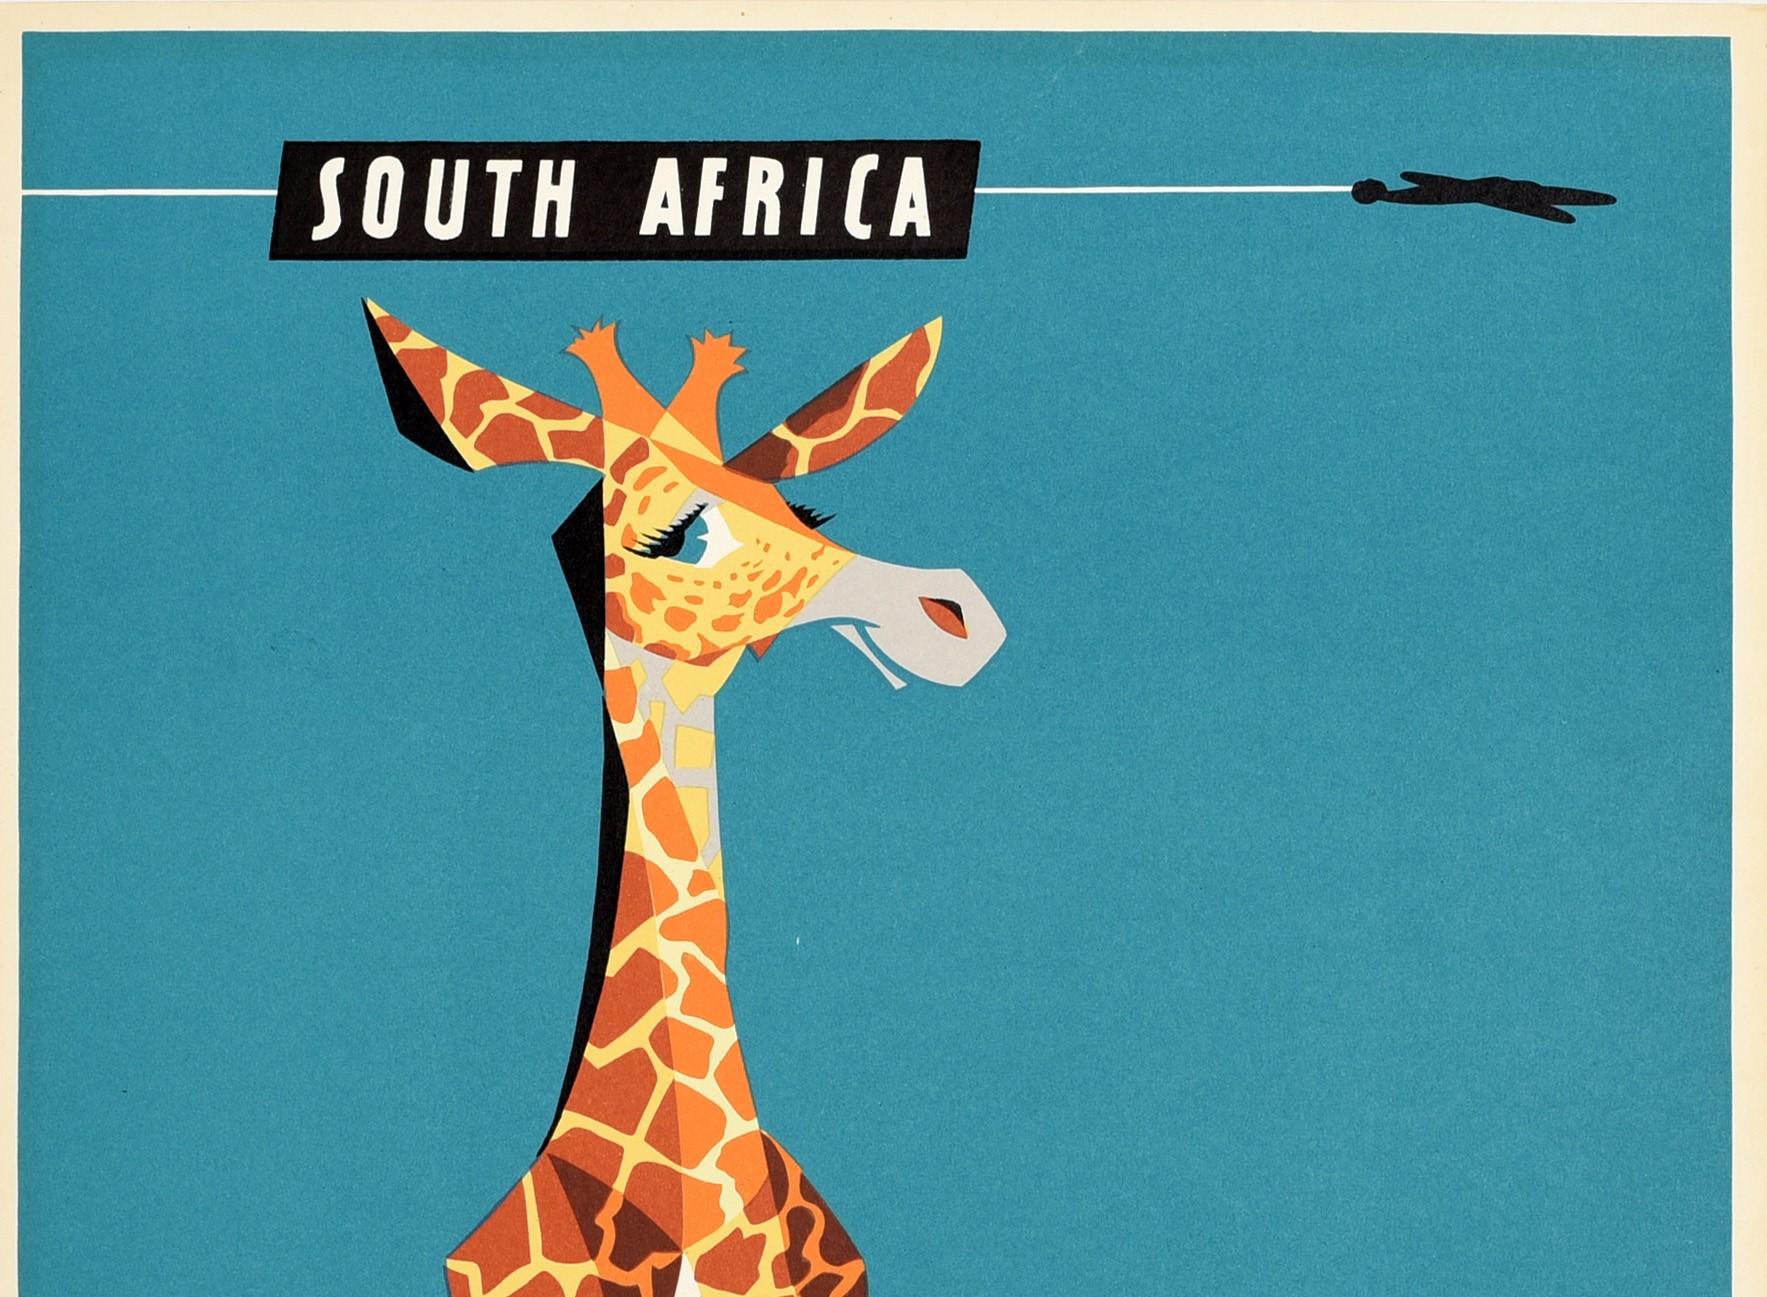 Original Vintage Travel Poster South Africa Qantas Airline BOAC TEAL SAA Giraffe - Print by Harry Rogers